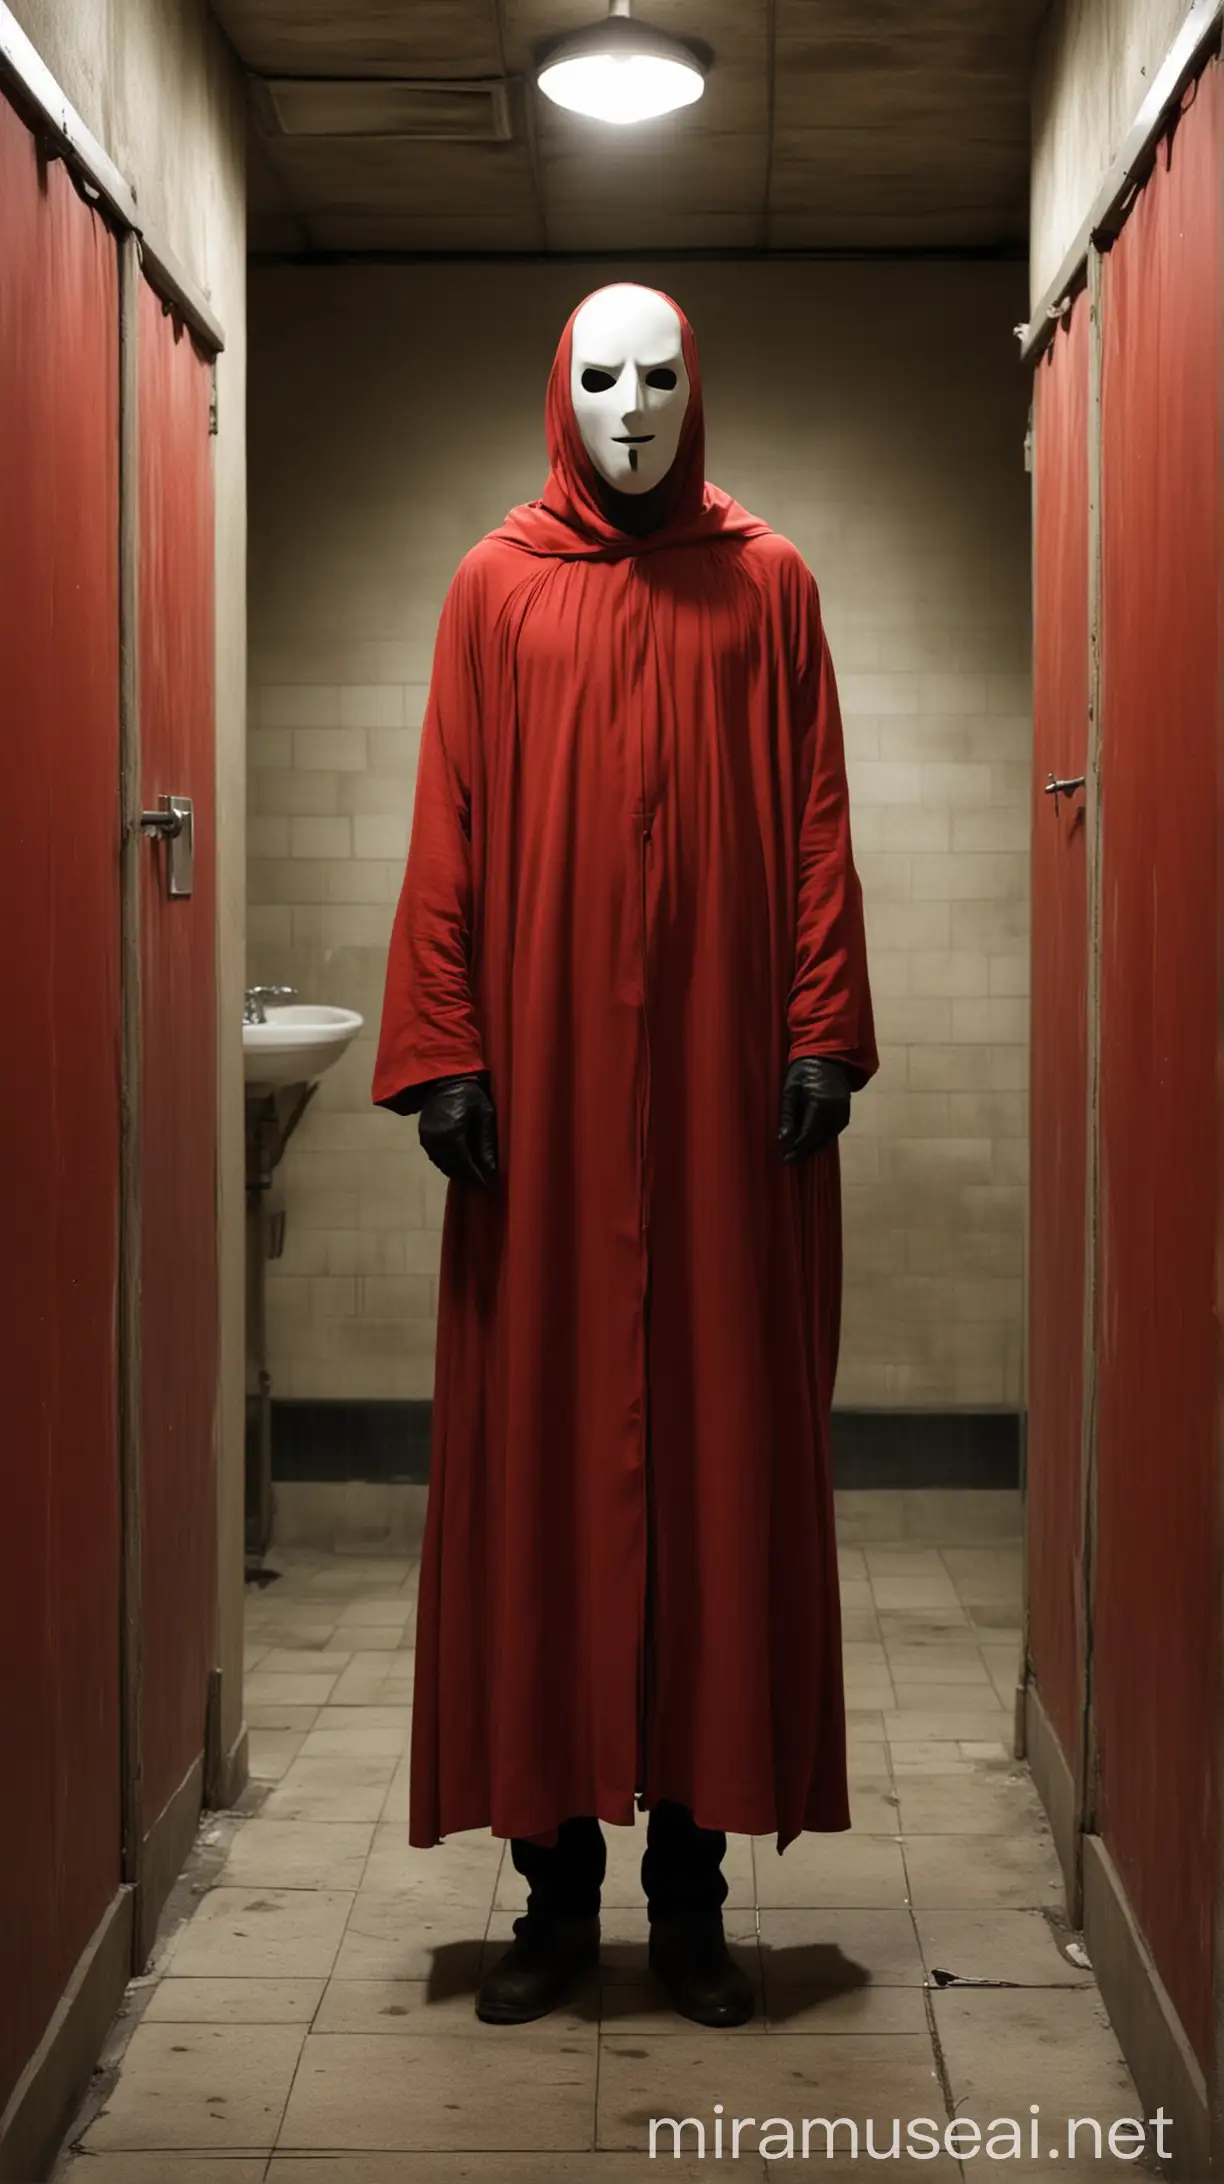 Aka manto is described as a tall, slender man wearing a flowing red cloak that drapes around his body. His face is obscured by a white mask, devoid of any features except for a mouth. In some depictions, his eyes are said to glow a sinister red. He is often portrayed standing ominously in darkened public restroom stalls,